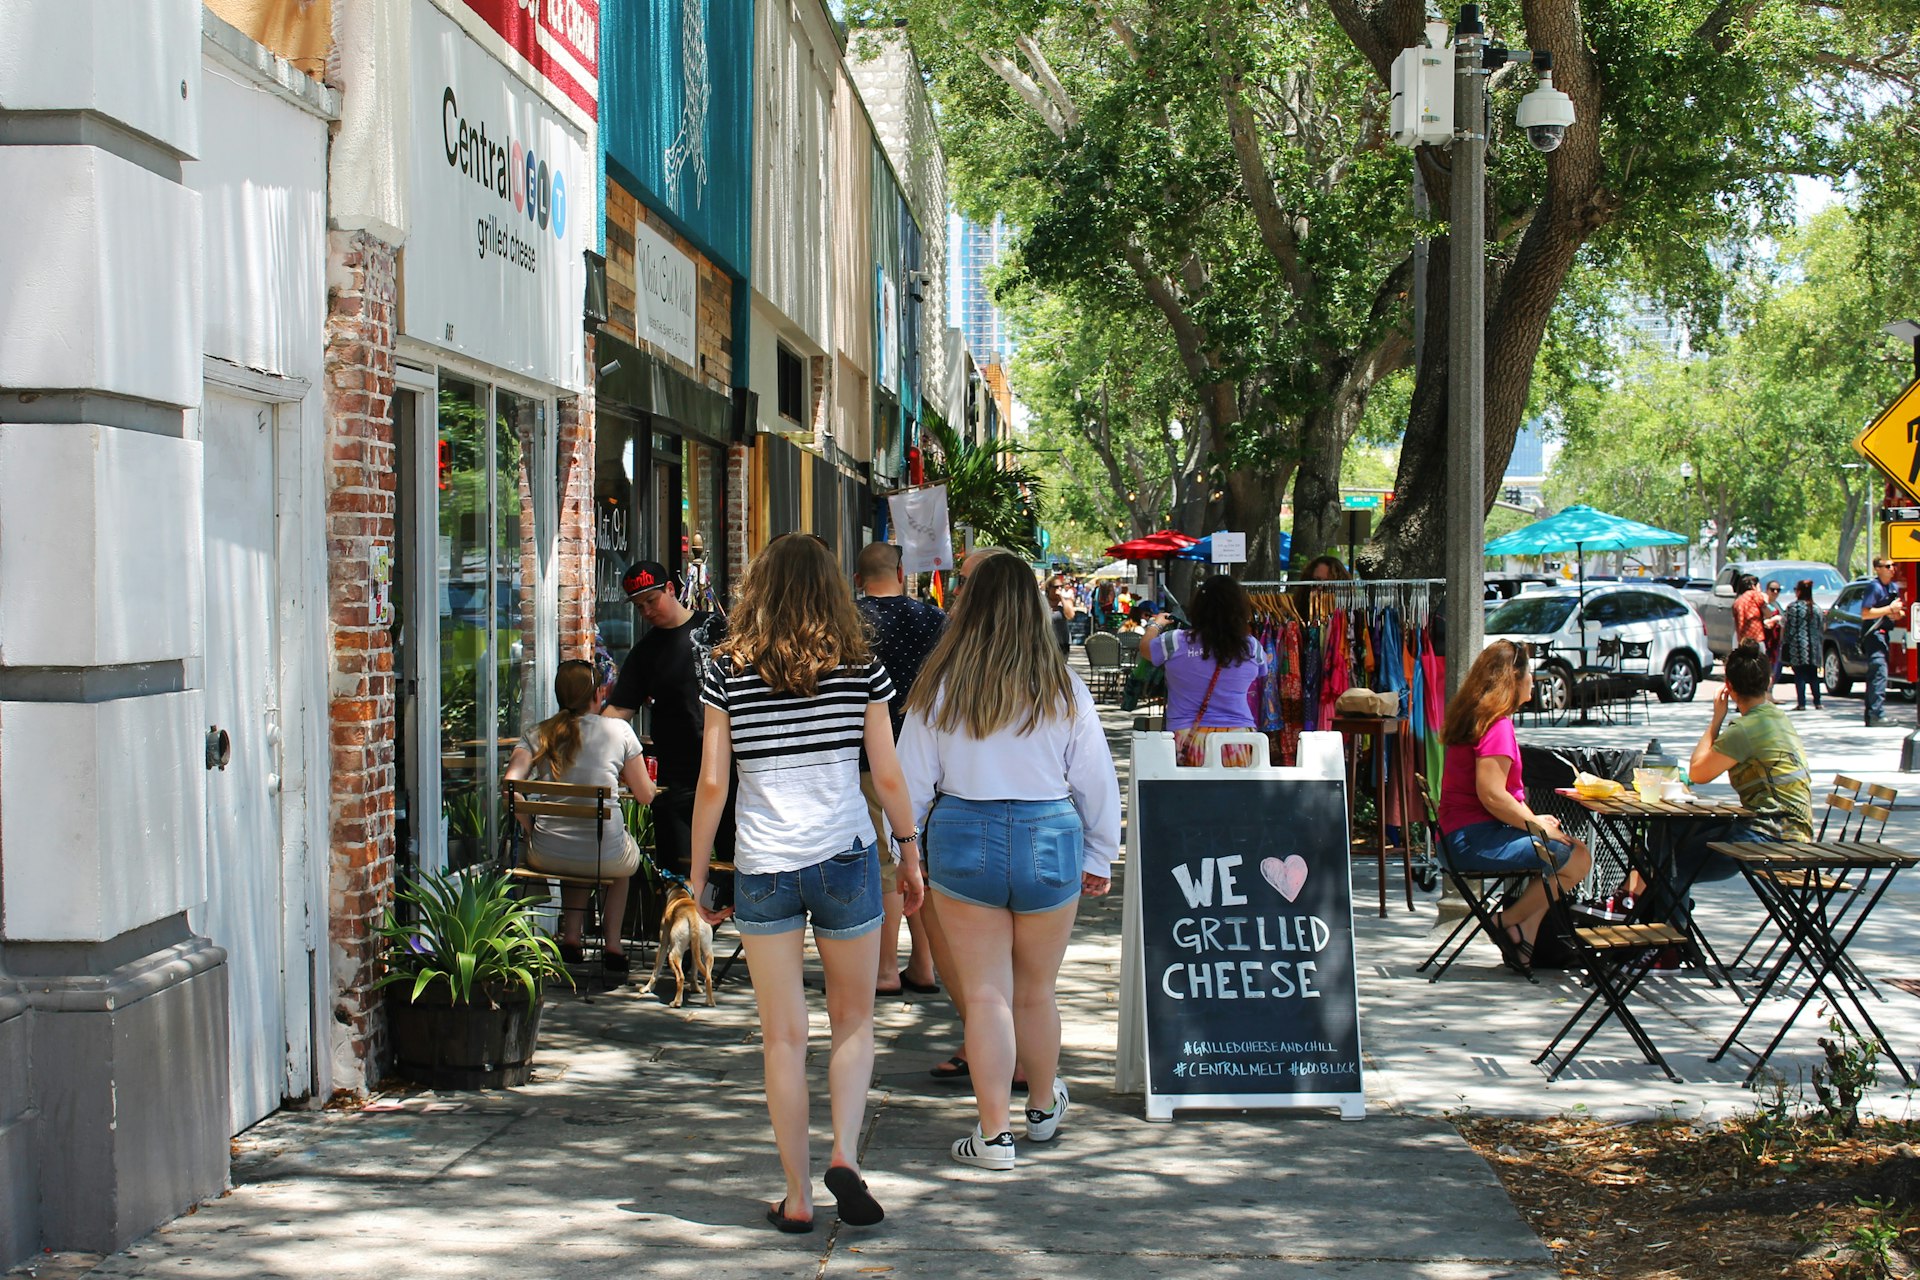 Two young women with dirty blonde hair in blue jean shorts and white tops walk past rows of shops in St. Pete. where a couple are sitting at cafe tables outside a restaurant advertising grilled cheese on a sandwich board sign. Racks of colorful clothes sit on the sidewalk in the background, where another woman is browsing.